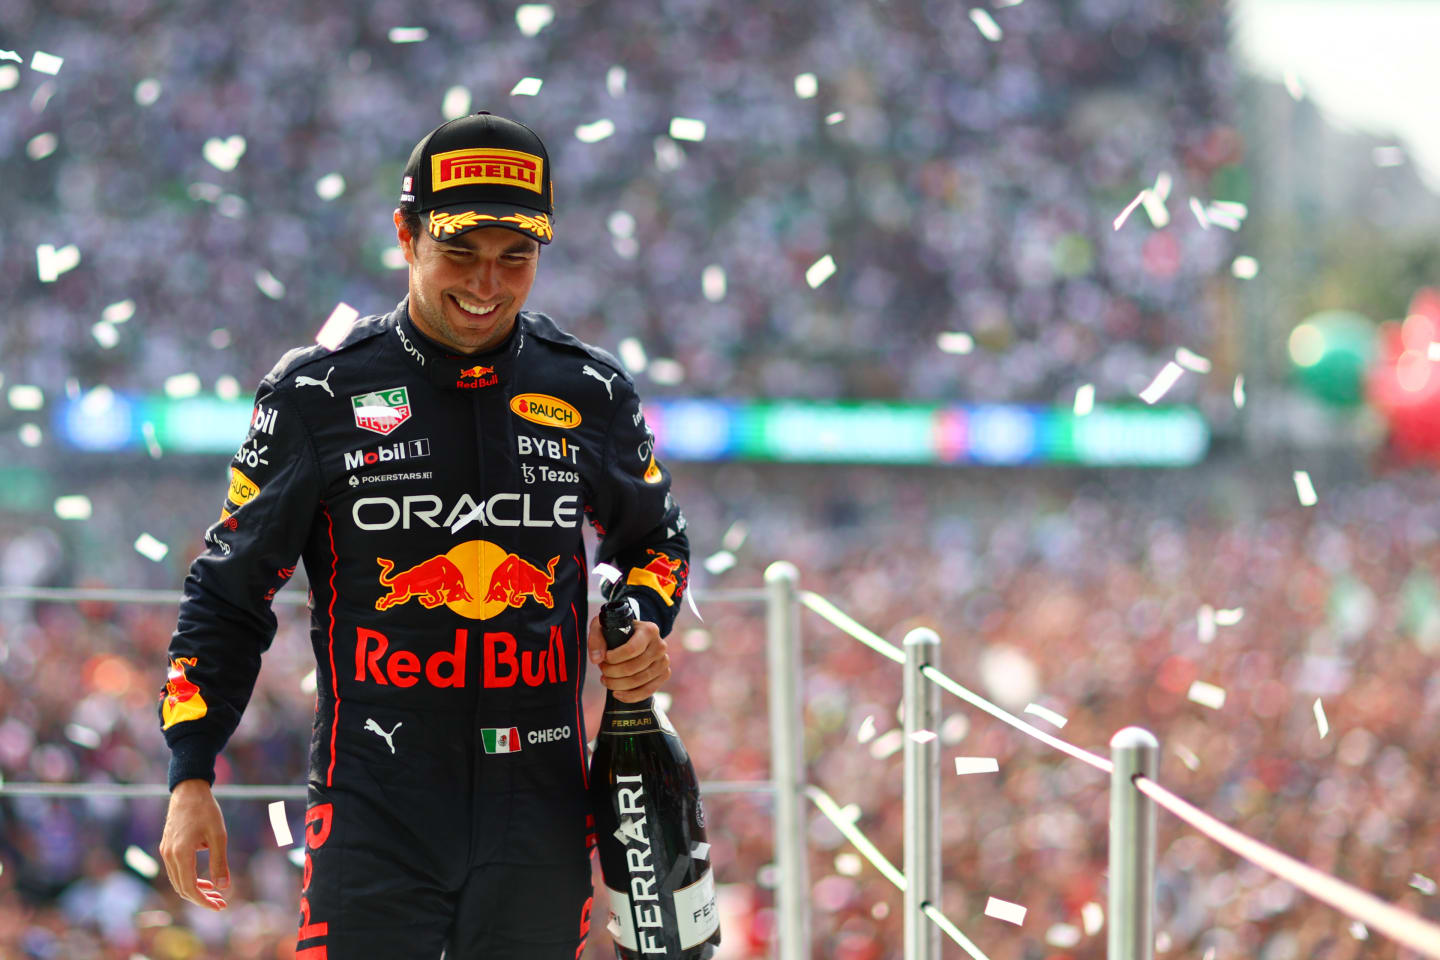 MEXICO CITY, MEXICO - OCTOBER 30: Third placed Sergio Perez of Mexico and Oracle Red Bull Racing celebrates on the podium after the F1 Grand Prix of Mexico at Autodromo Hermanos Rodriguez on October 30, 2022 in Mexico City, Mexico. (Photo by Dan Istitene - Formula 1/Formula 1 via Getty Images)